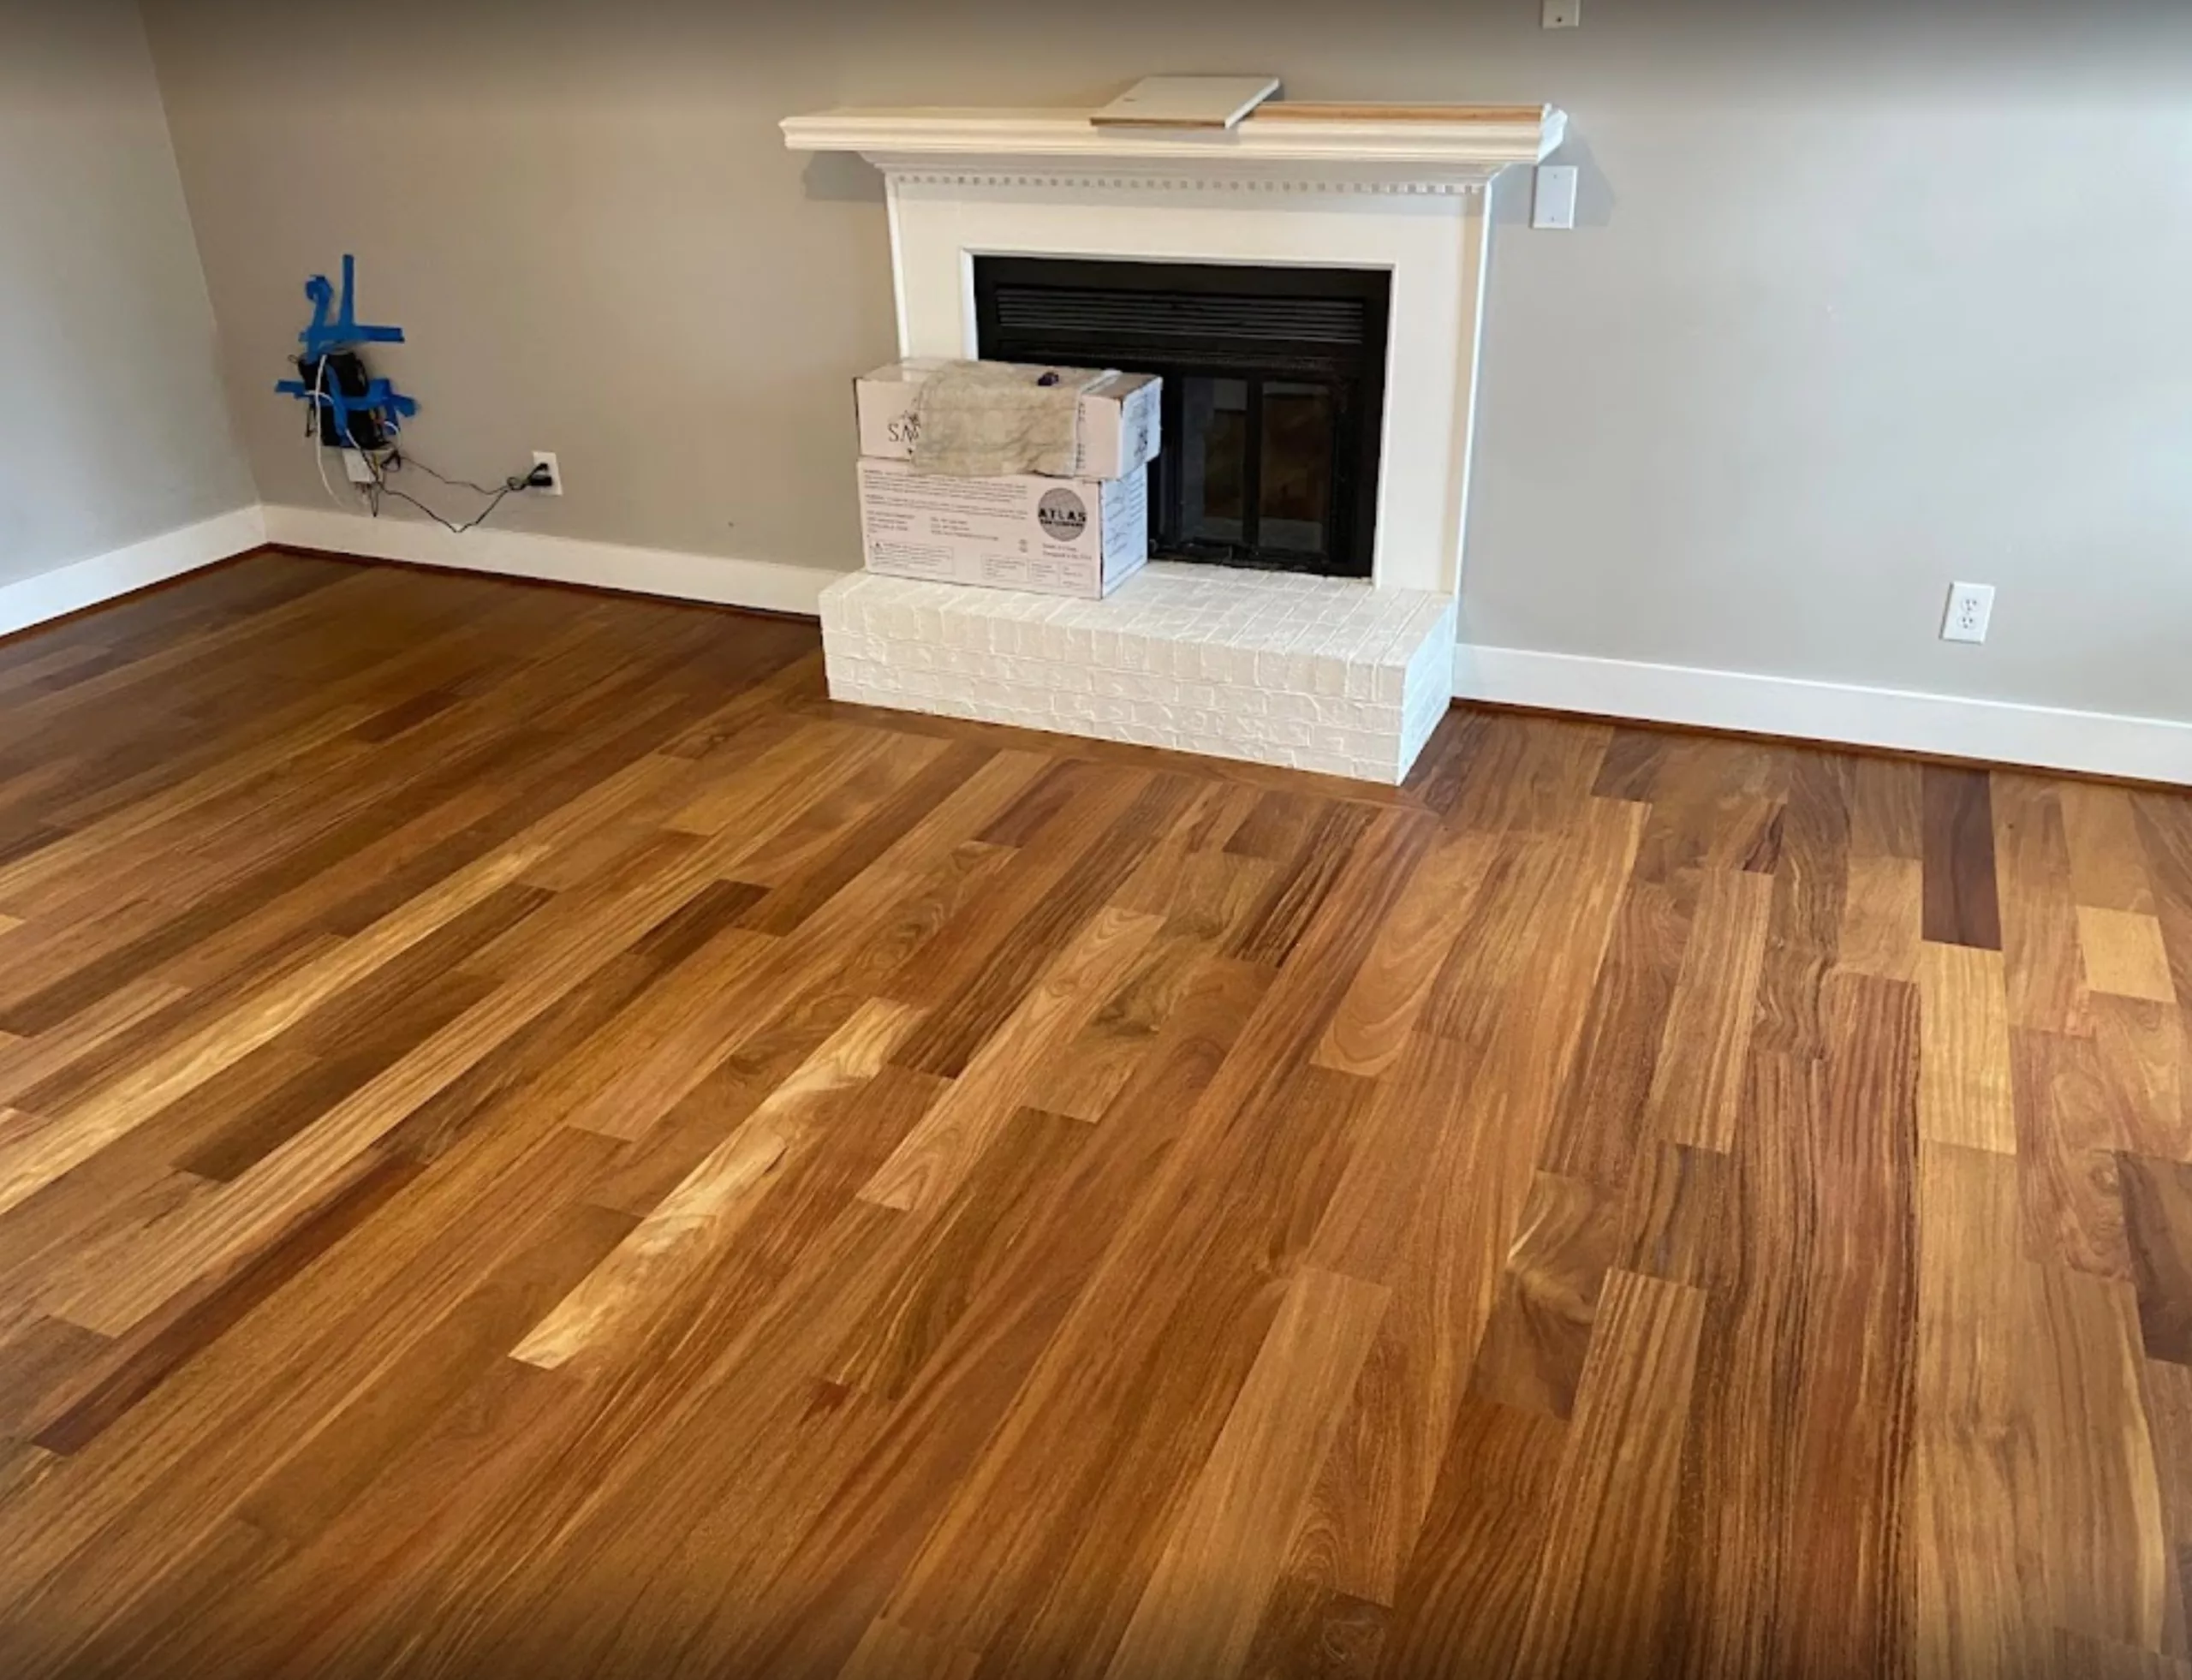 new hardwood floors in front of fireplace